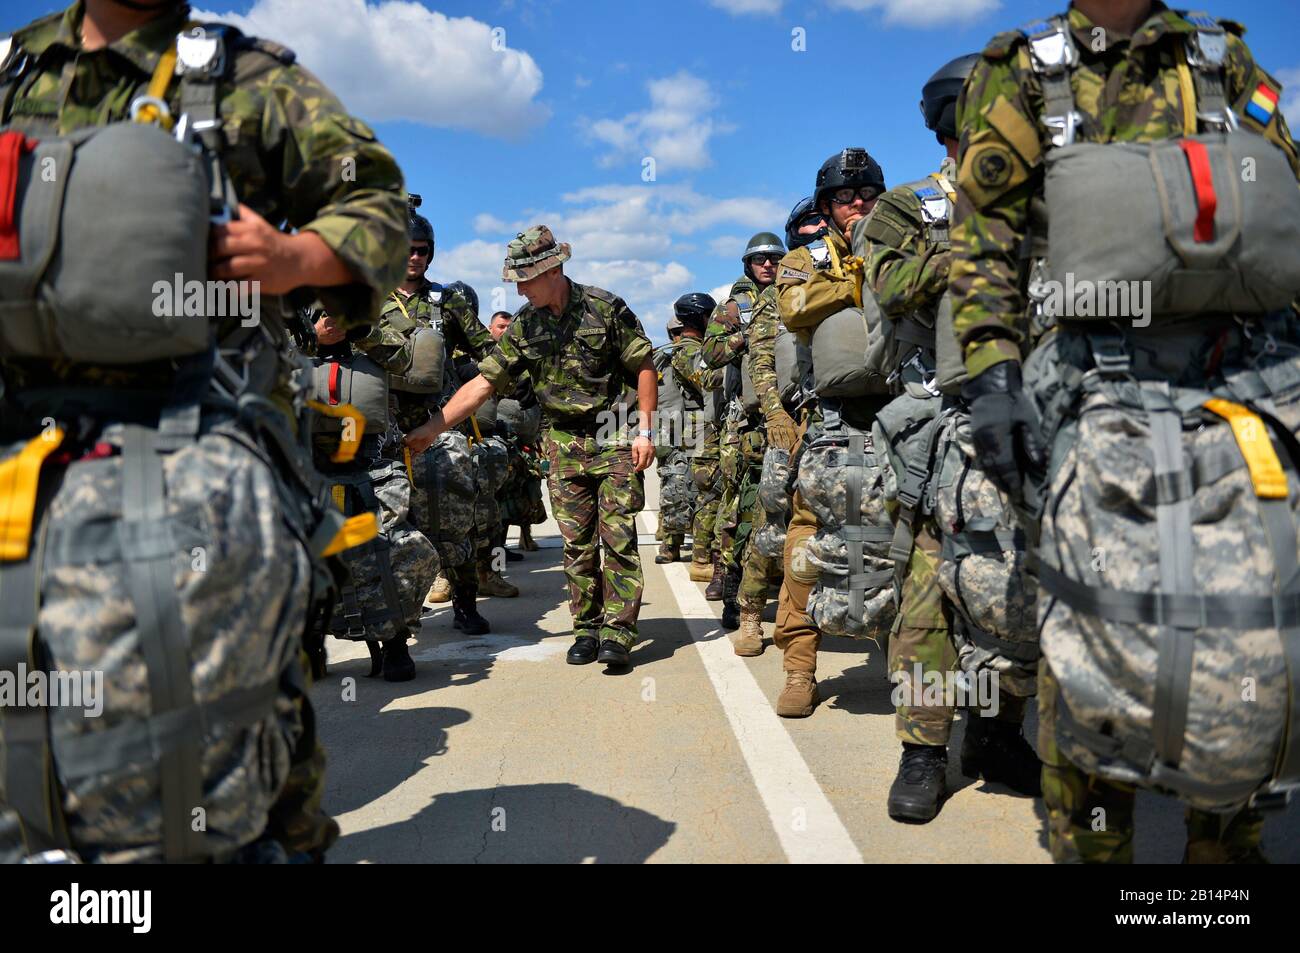 A Romanian military member inspects his troops as they prepare to board a U.S. Air Force C-130J Super Hercules during a bilateral training exercise with U.S. forces at Boboc Air Base, Romania, Aug. 24, 2017. U.S. and Romanian troops joined forces for Carpathian Fall, which aims to promote interoperability and unit cohesion among allies. (U.S. Air Force photo by Airman 1st Class Joshua Magbanua) Stock Photo